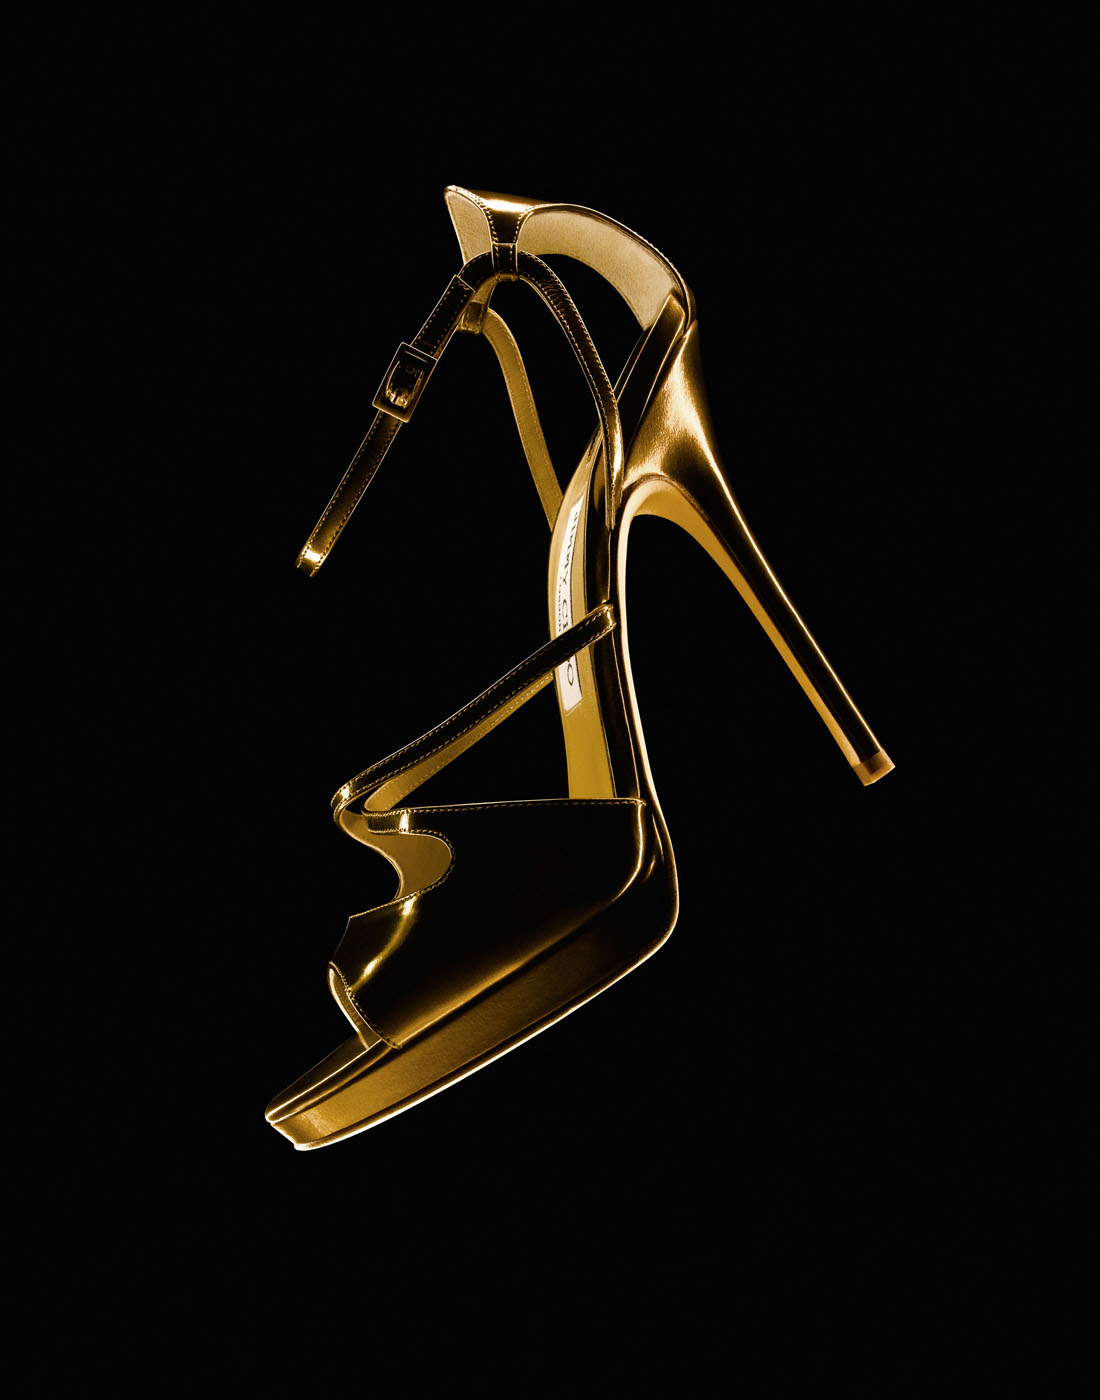 Gold shoe on black by Alexander Kent London based still life and product photographer.